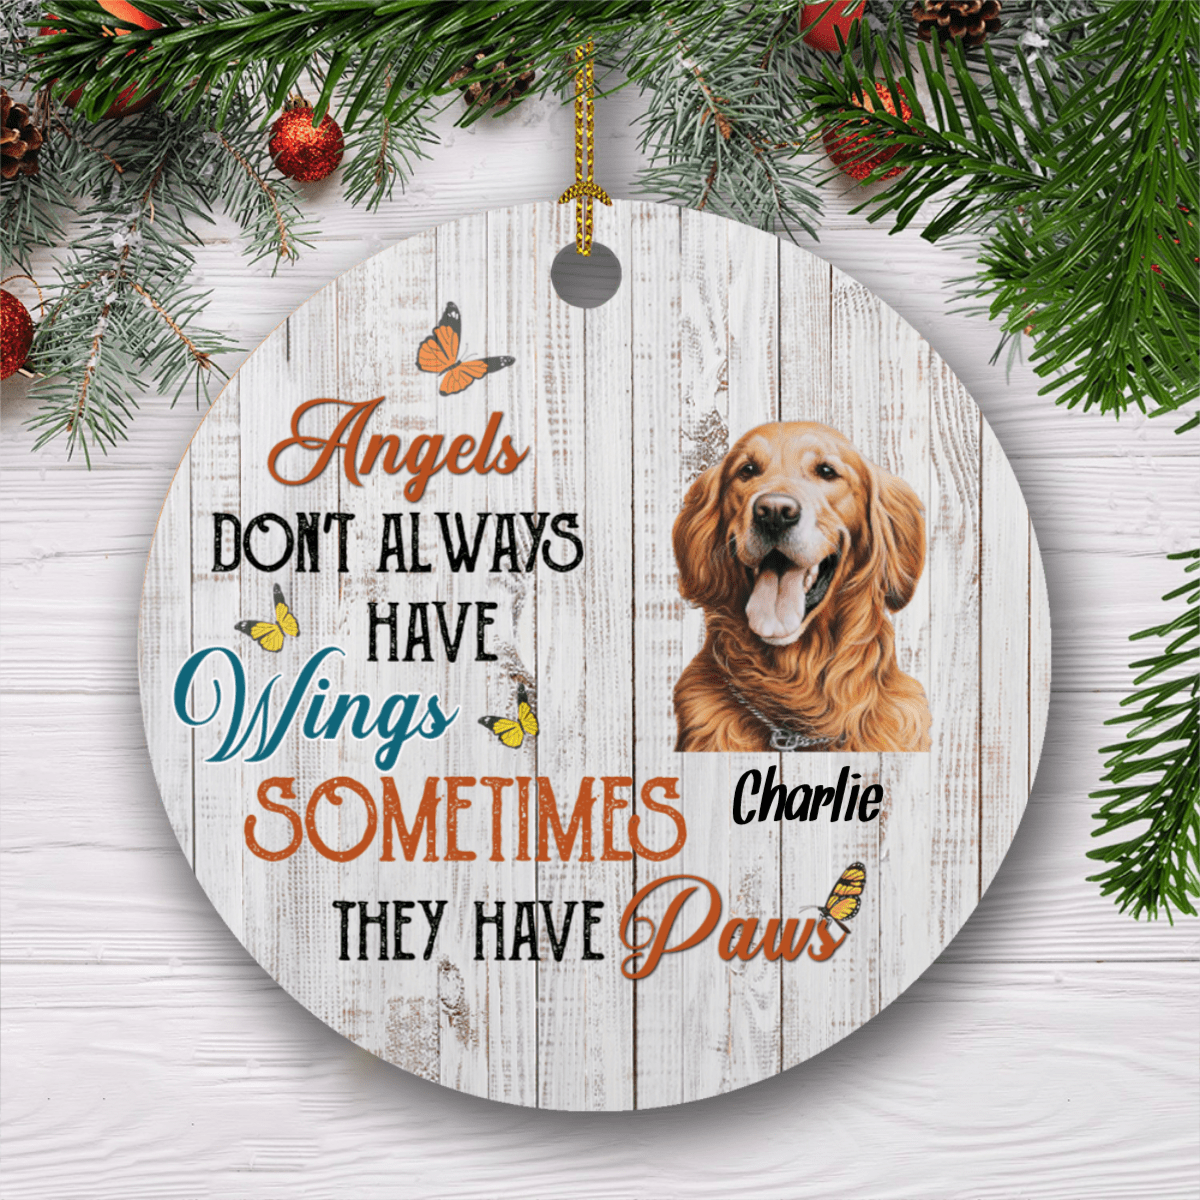 GeckoCustom Angels Don't Always Have Wings Sometimes They Have Paws , Custom Dog Photo, Personalized Gift For Dog LoversSG02 Pack 1 / 2.75" tall - 0.125" thick